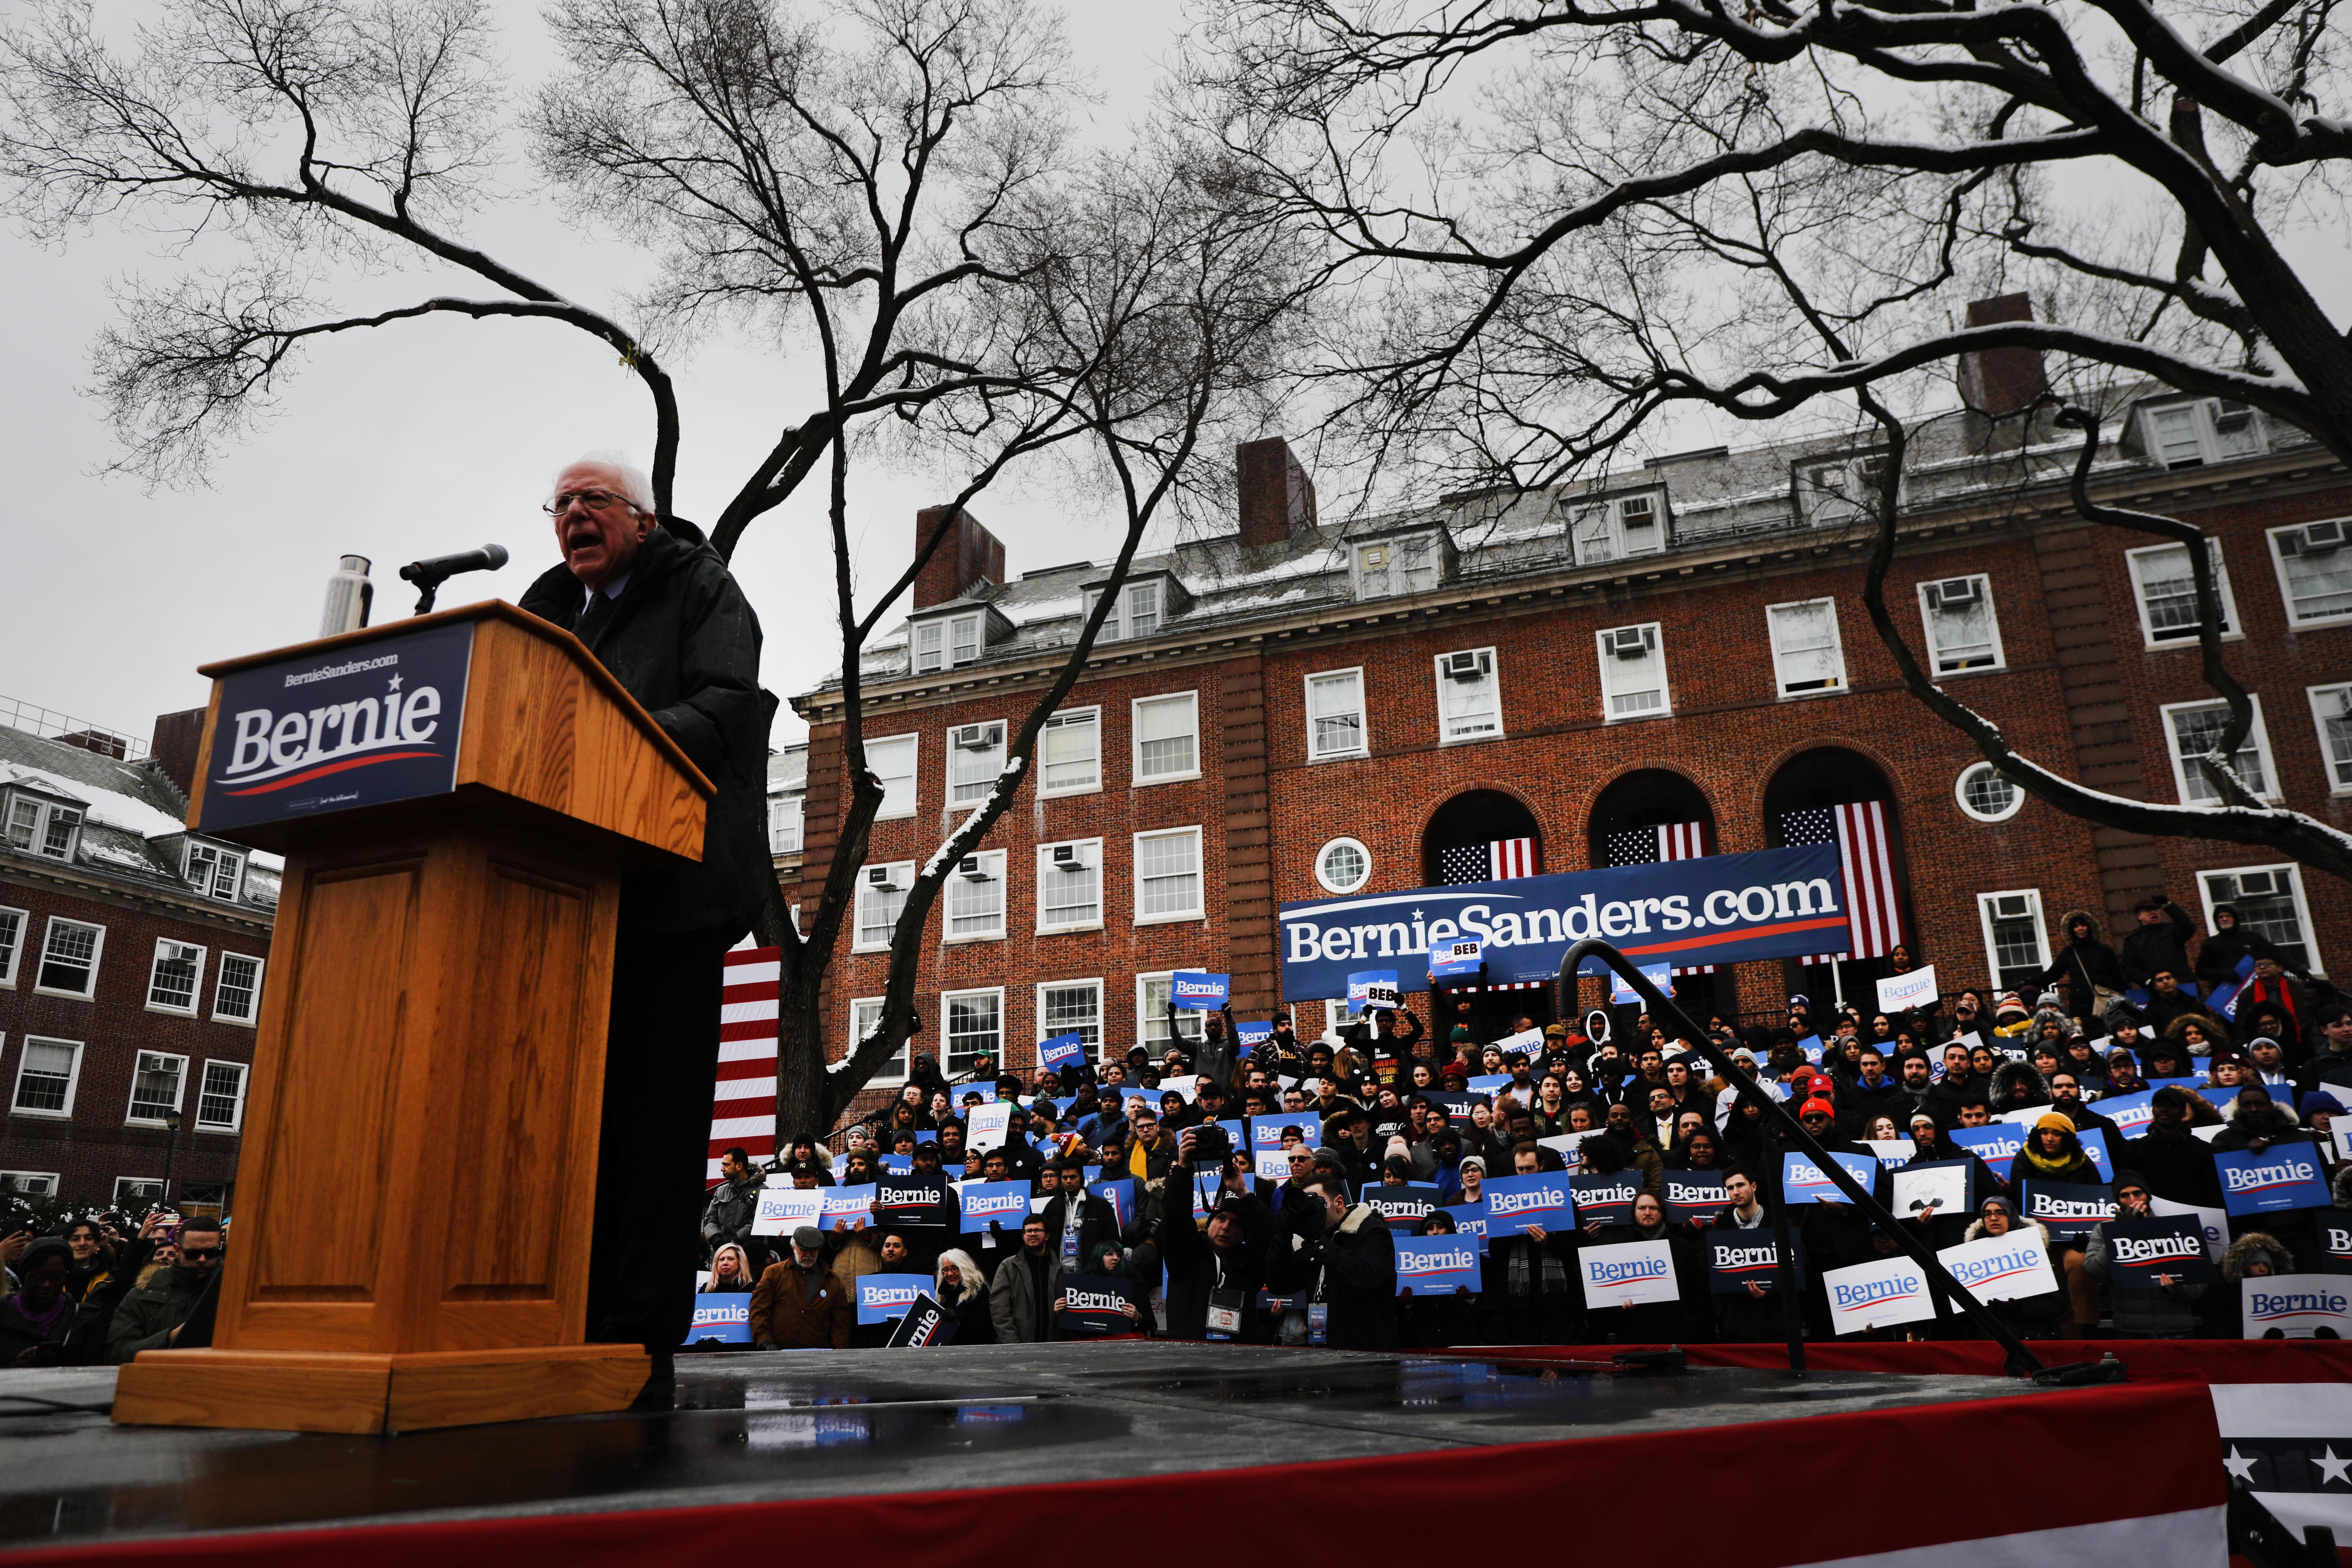 Bernie Sanders stands at a podium on a stage outdoors in front of supporters.